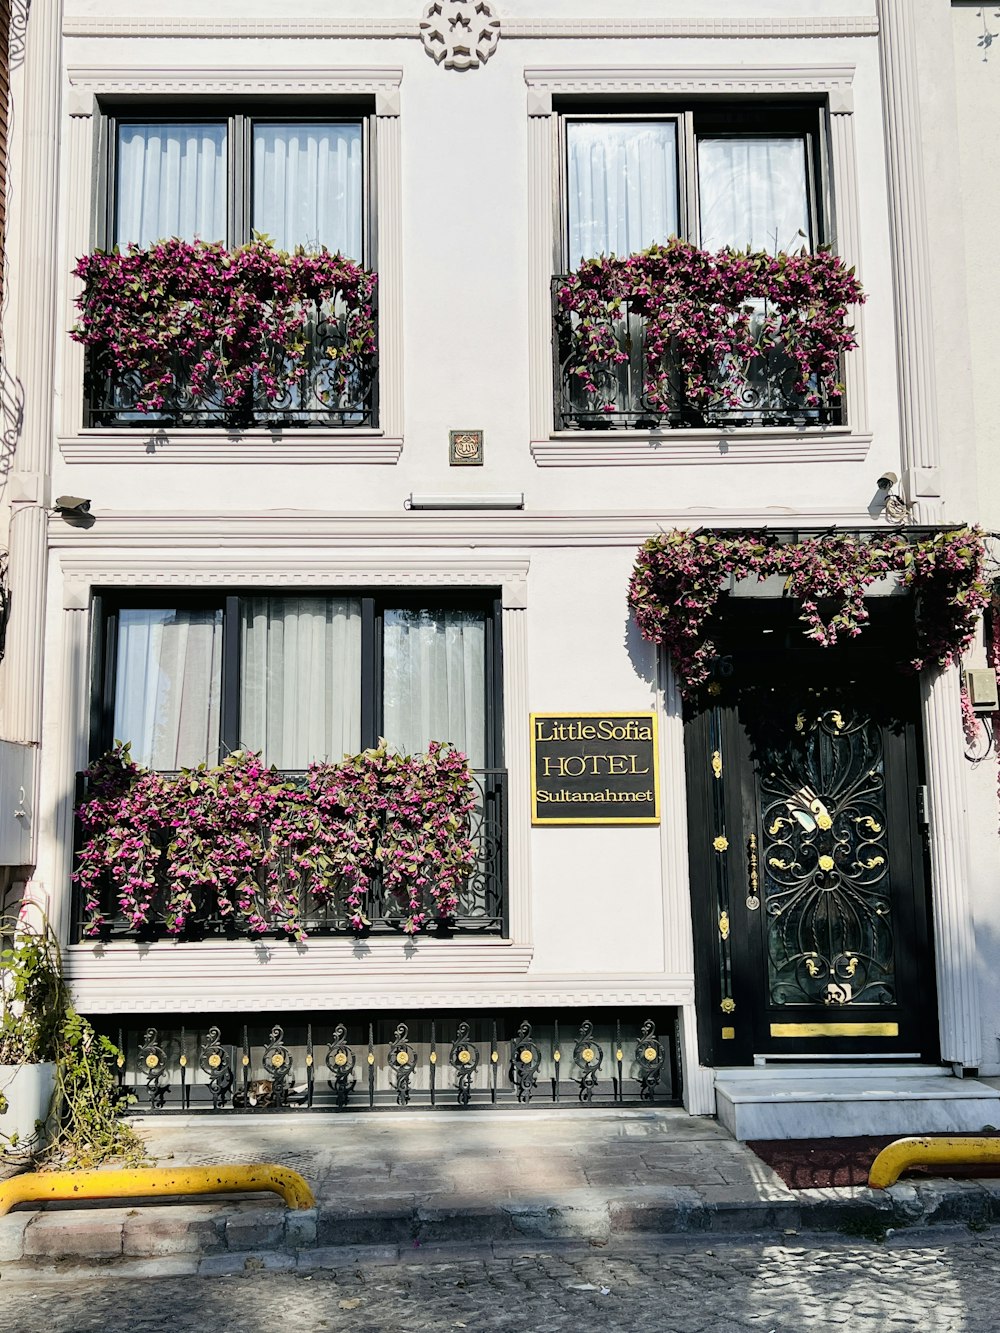 a building with flowers on the windows